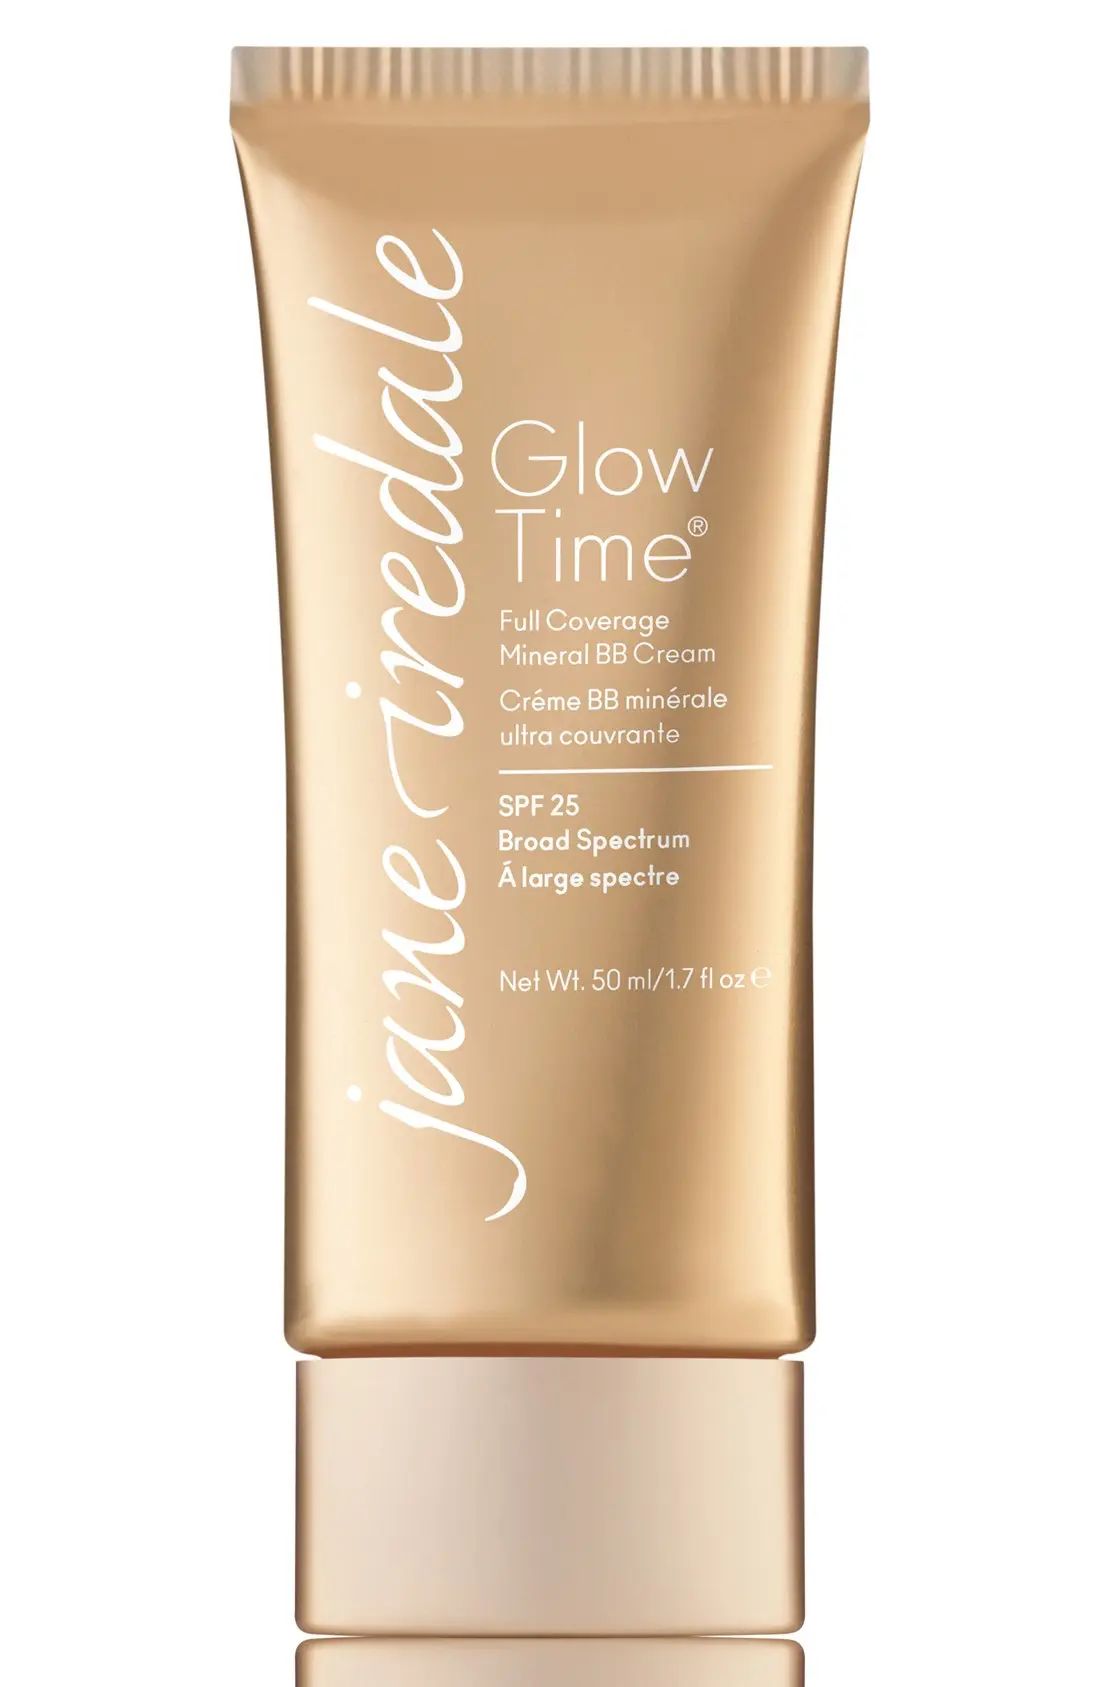 Jane Iredale Glow Time Full Coverage Mineral Bb Cream Broad Spectrum Spf 25, Size 1.7 oz - Bb3 | Nordstrom